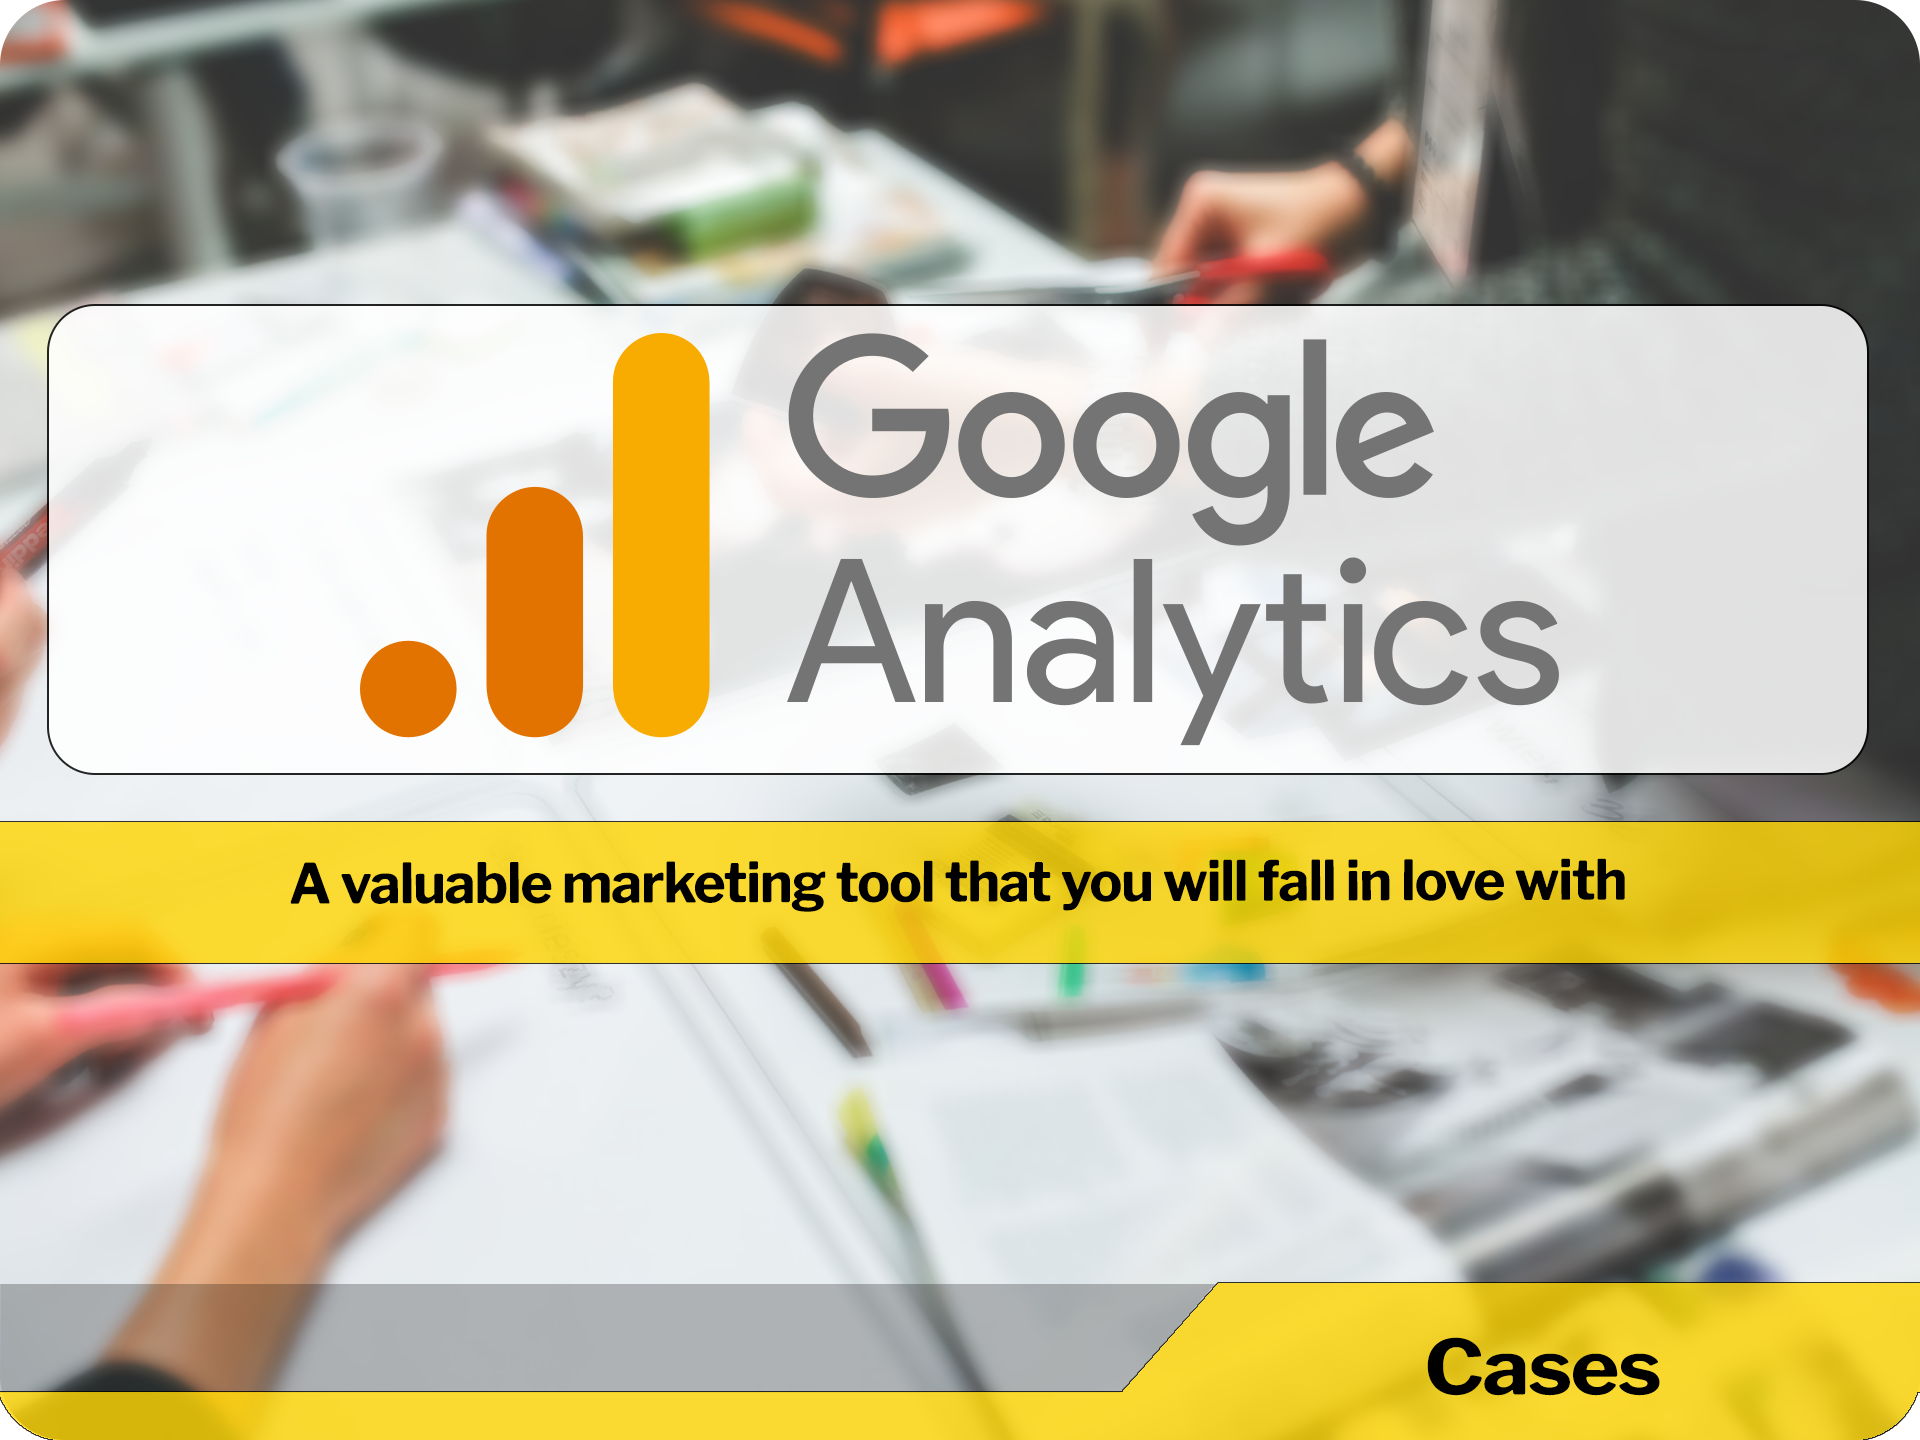 7 Google Analytics reports that you misuse